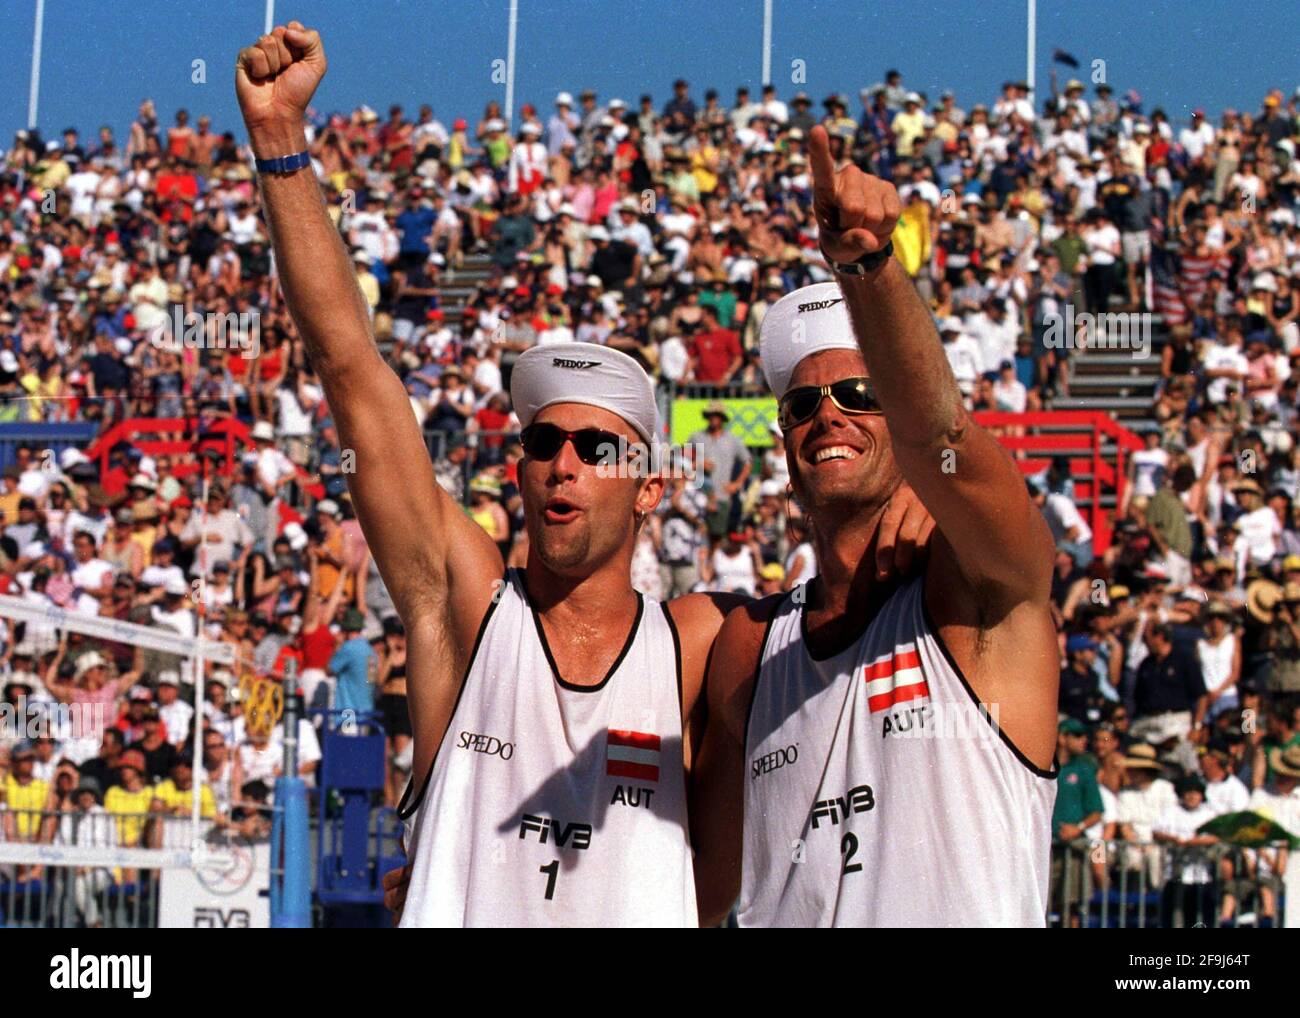 OLIVER STAMM AND NIKOLAS BERGER OF AUSTRIA, SEP 2000CELEBRATE AFTER BEATING AUSTRALIA IN THE MENS BEACH VOLLEYBALL AT THE SYDNEY OLYMPIC GAMES. Stock Photo